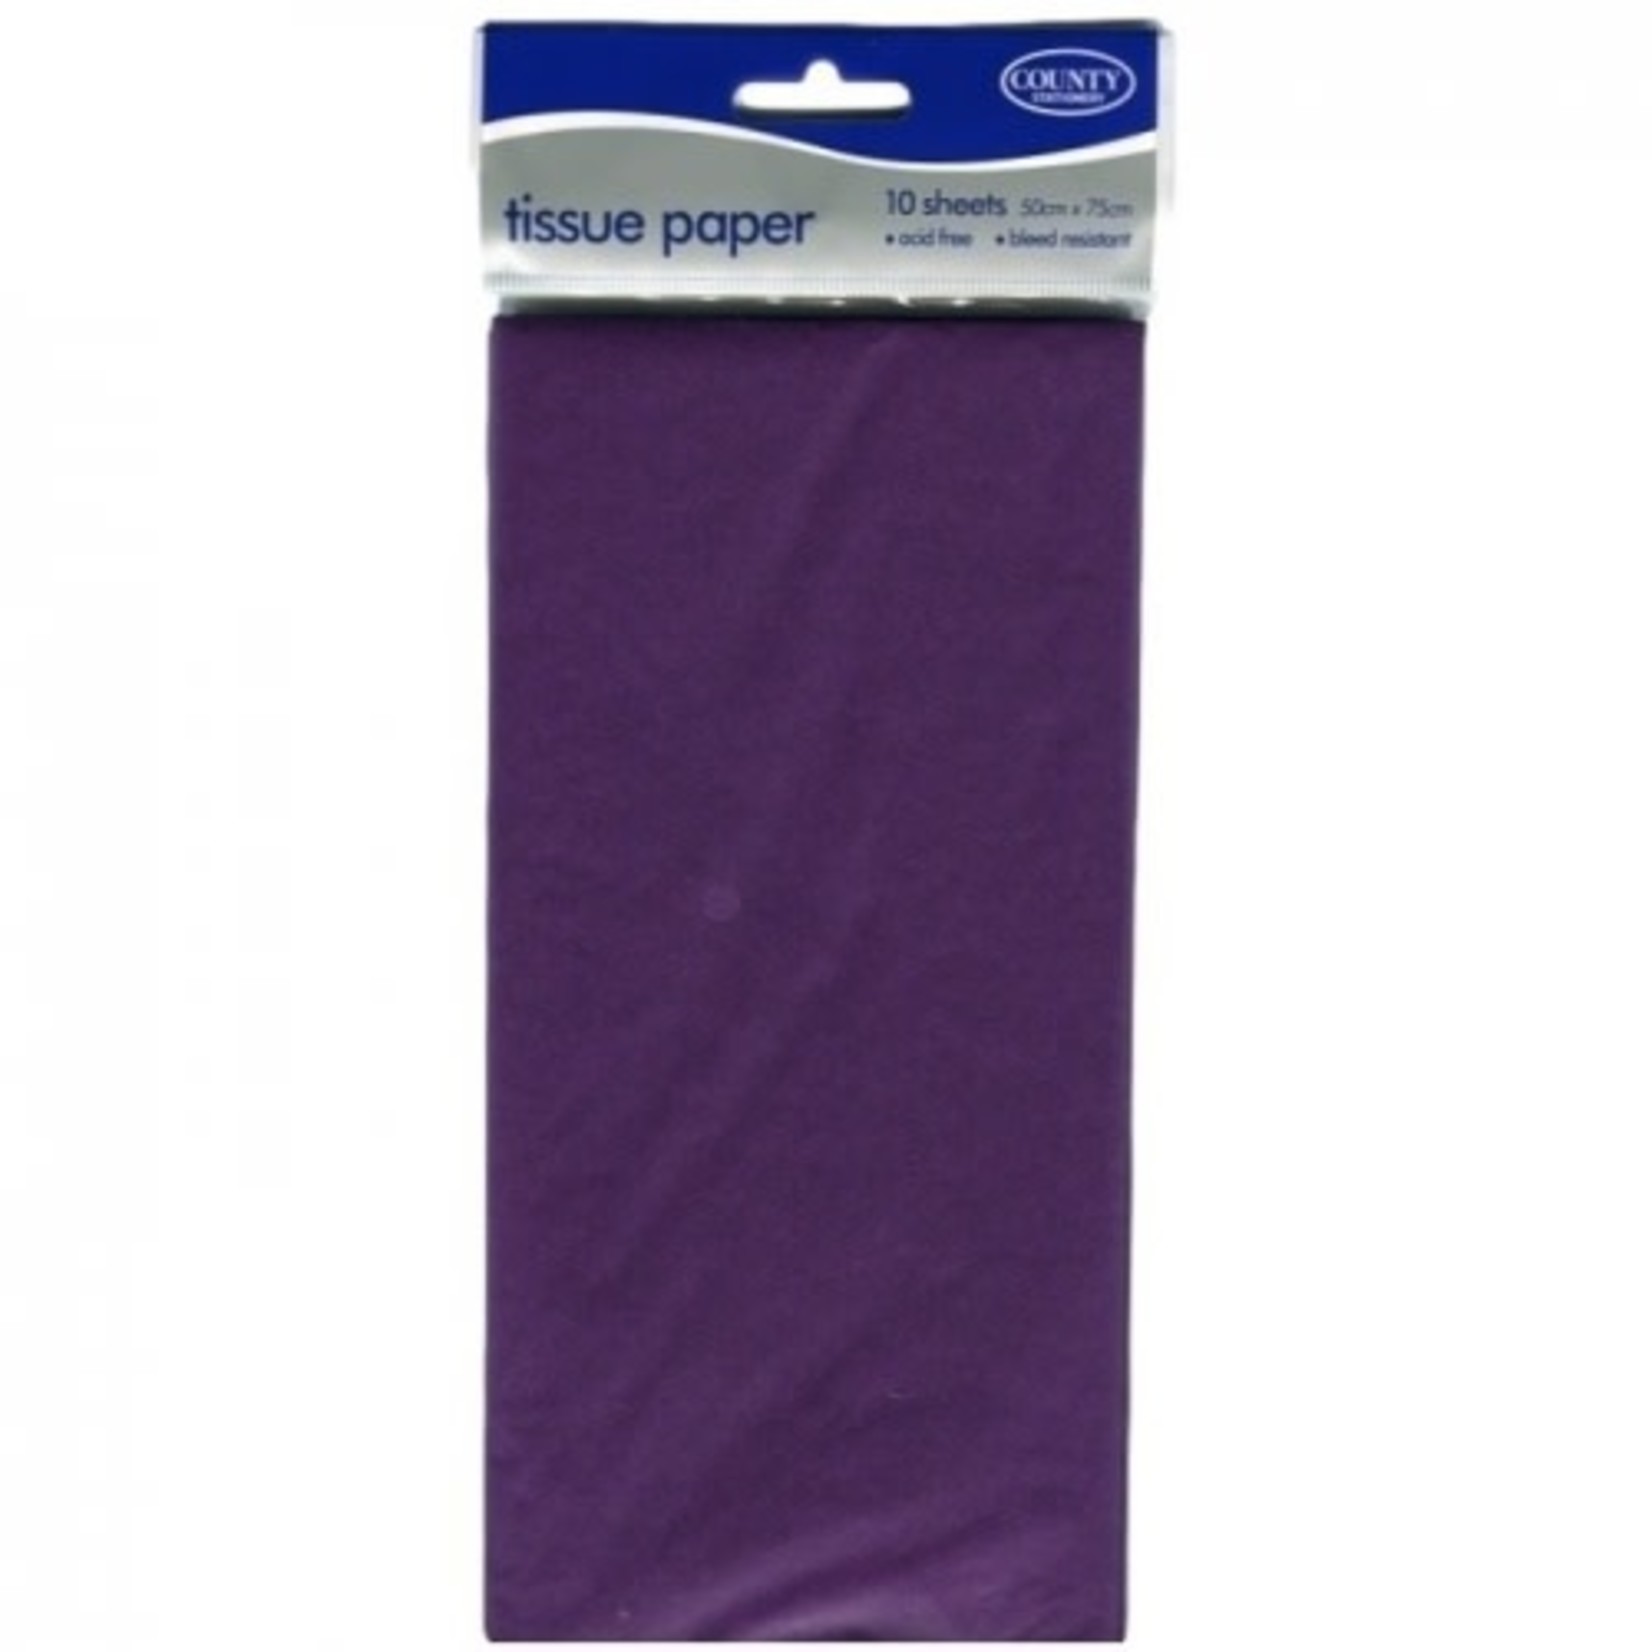 County Stationery Tissue Paper - Purple - 10 sheets